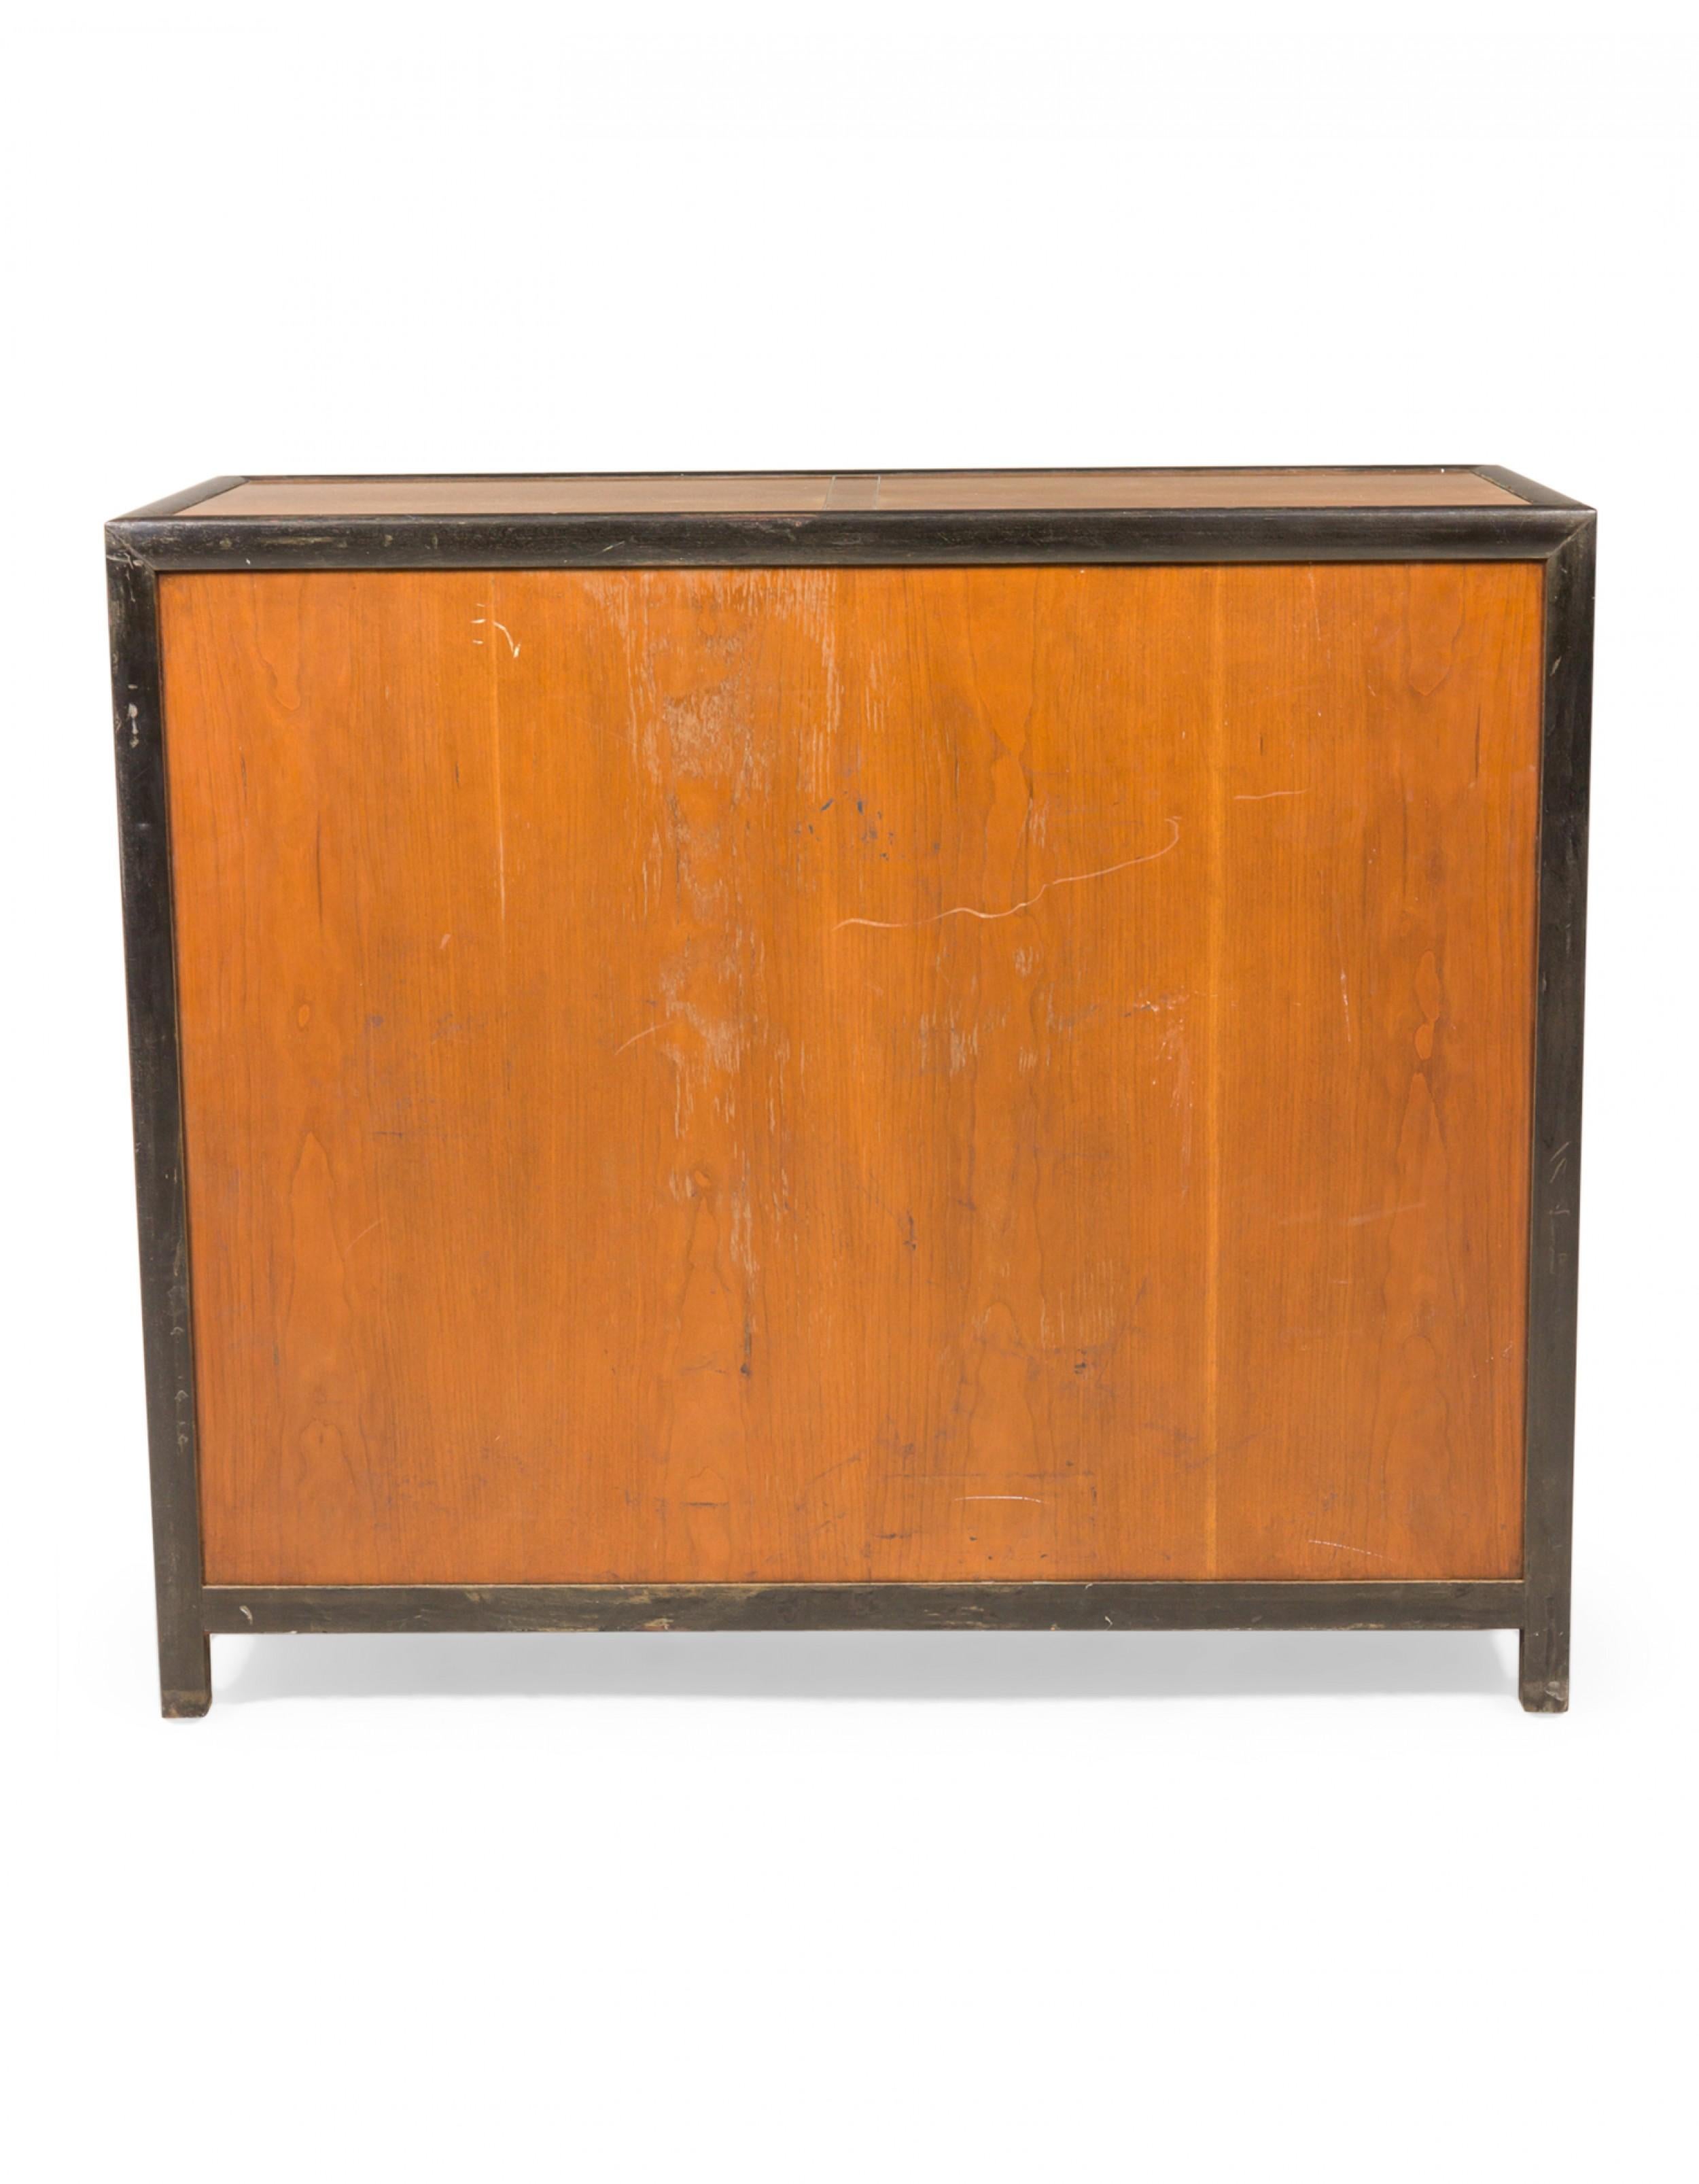 Michael Taylor for Baker Furniture Co. 'New World Group' Four Drawer Commode In Good Condition For Sale In New York, NY